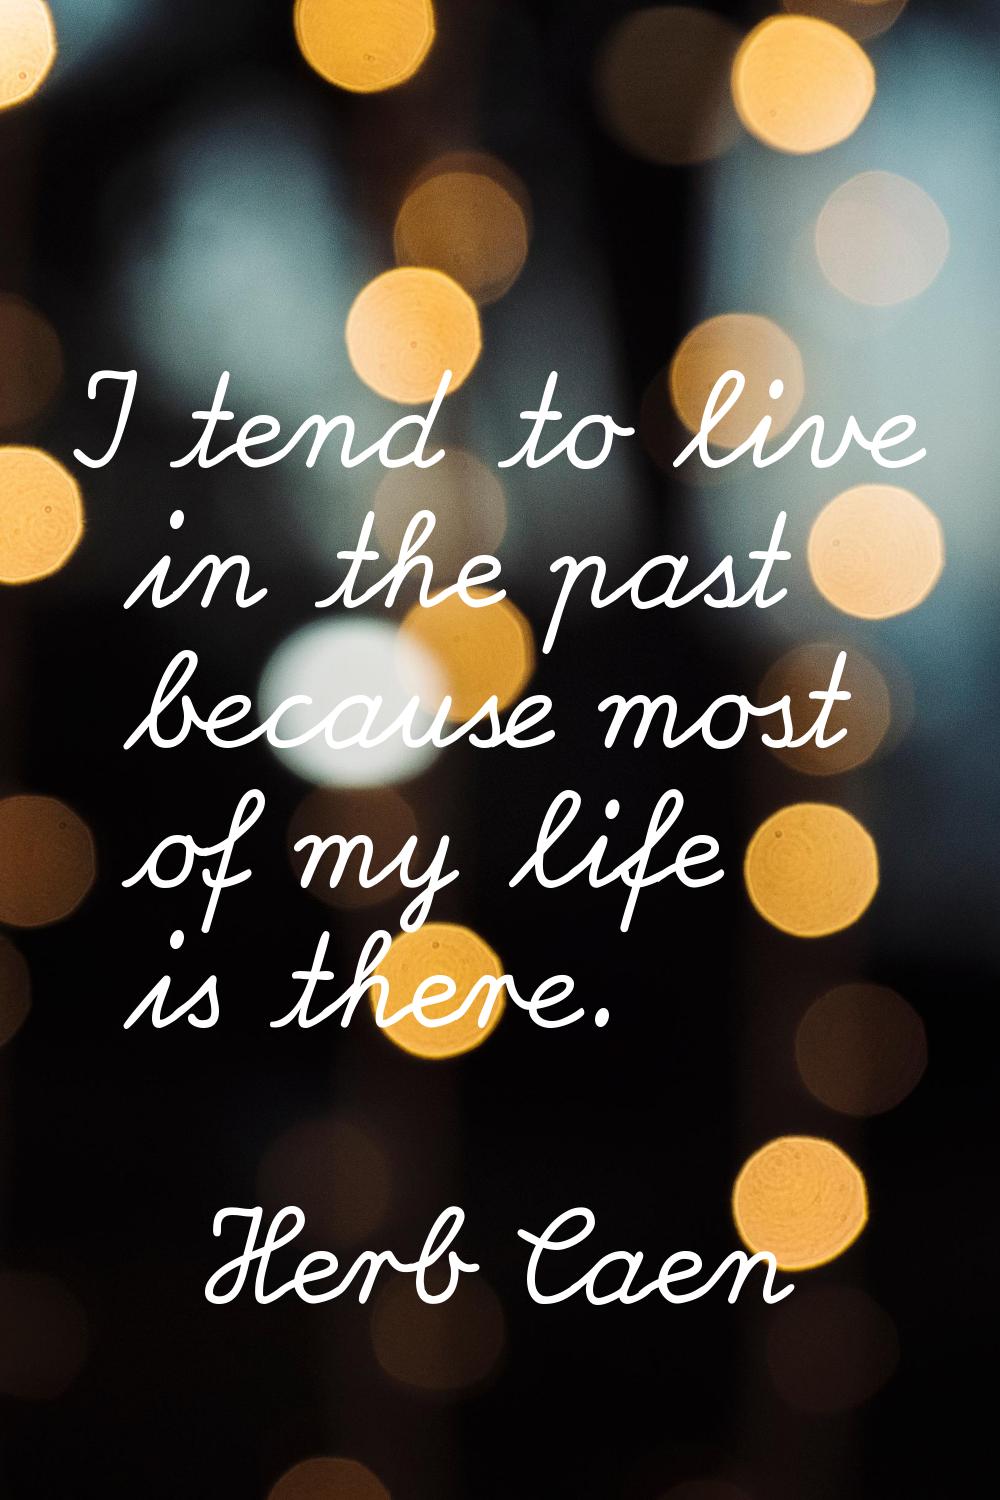 I tend to live in the past because most of my life is there.